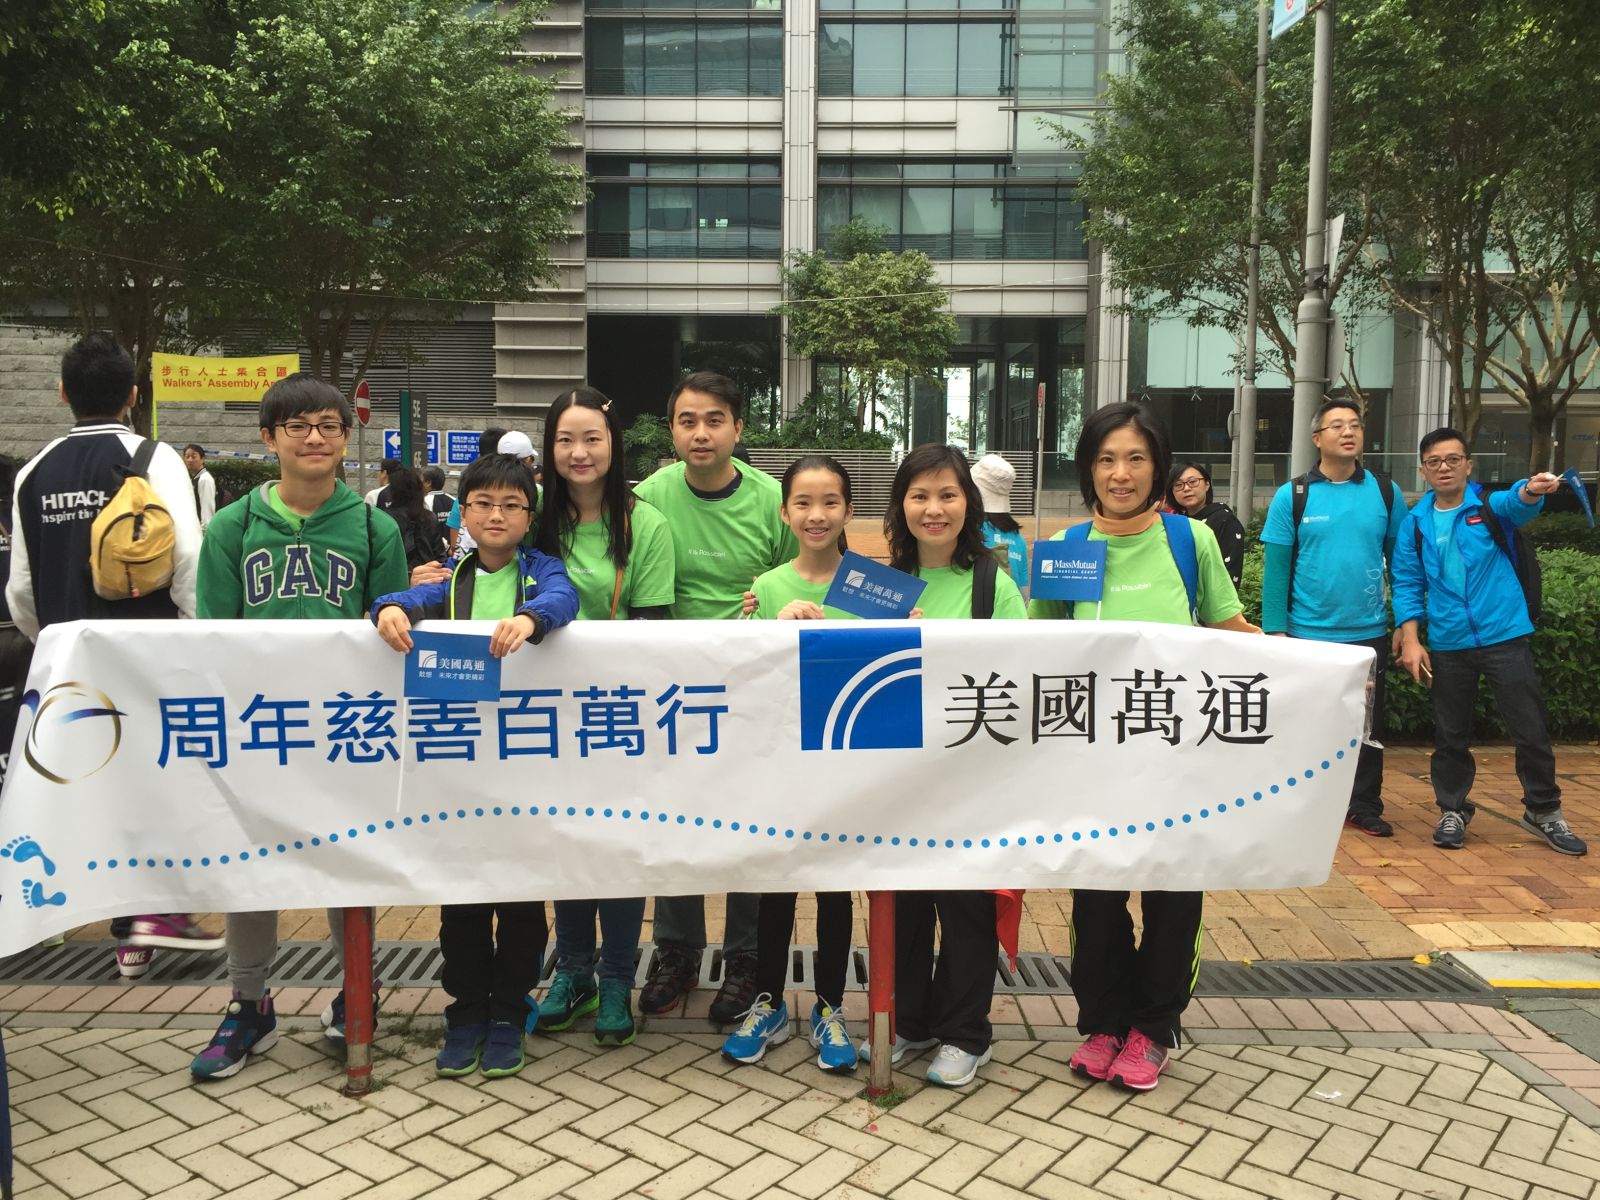 Community Chest New Territories Walk for Millions